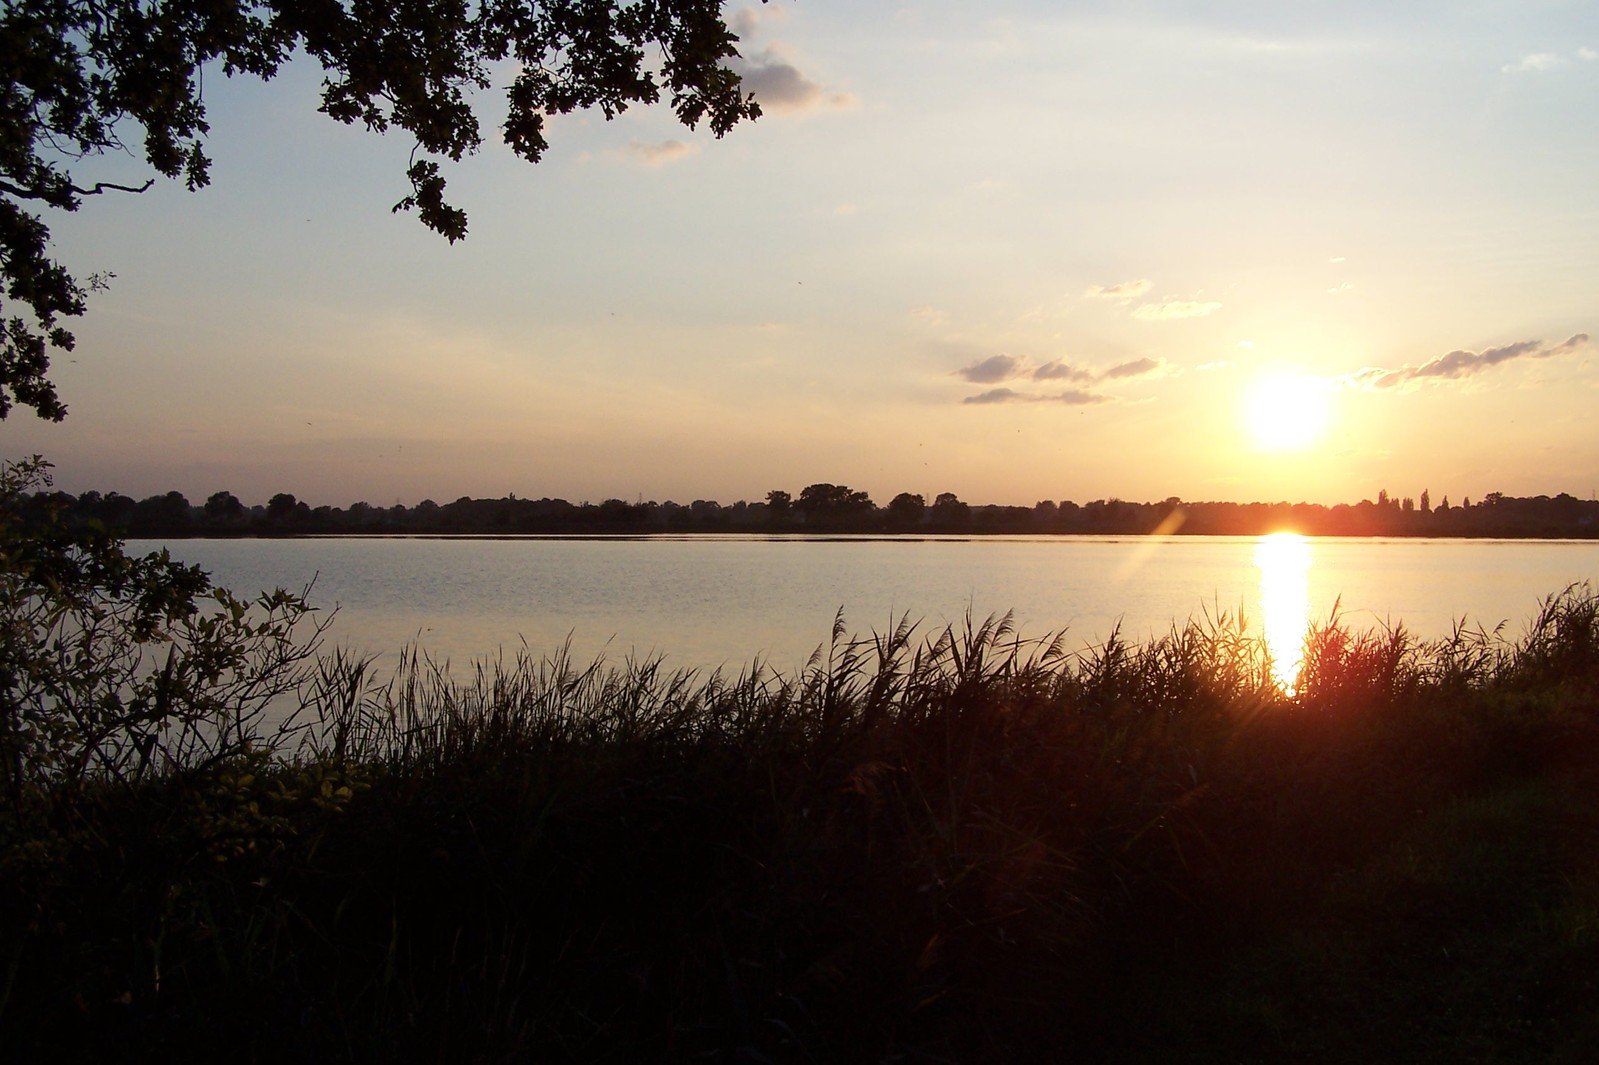 the sun is setting over a small lake with high grass